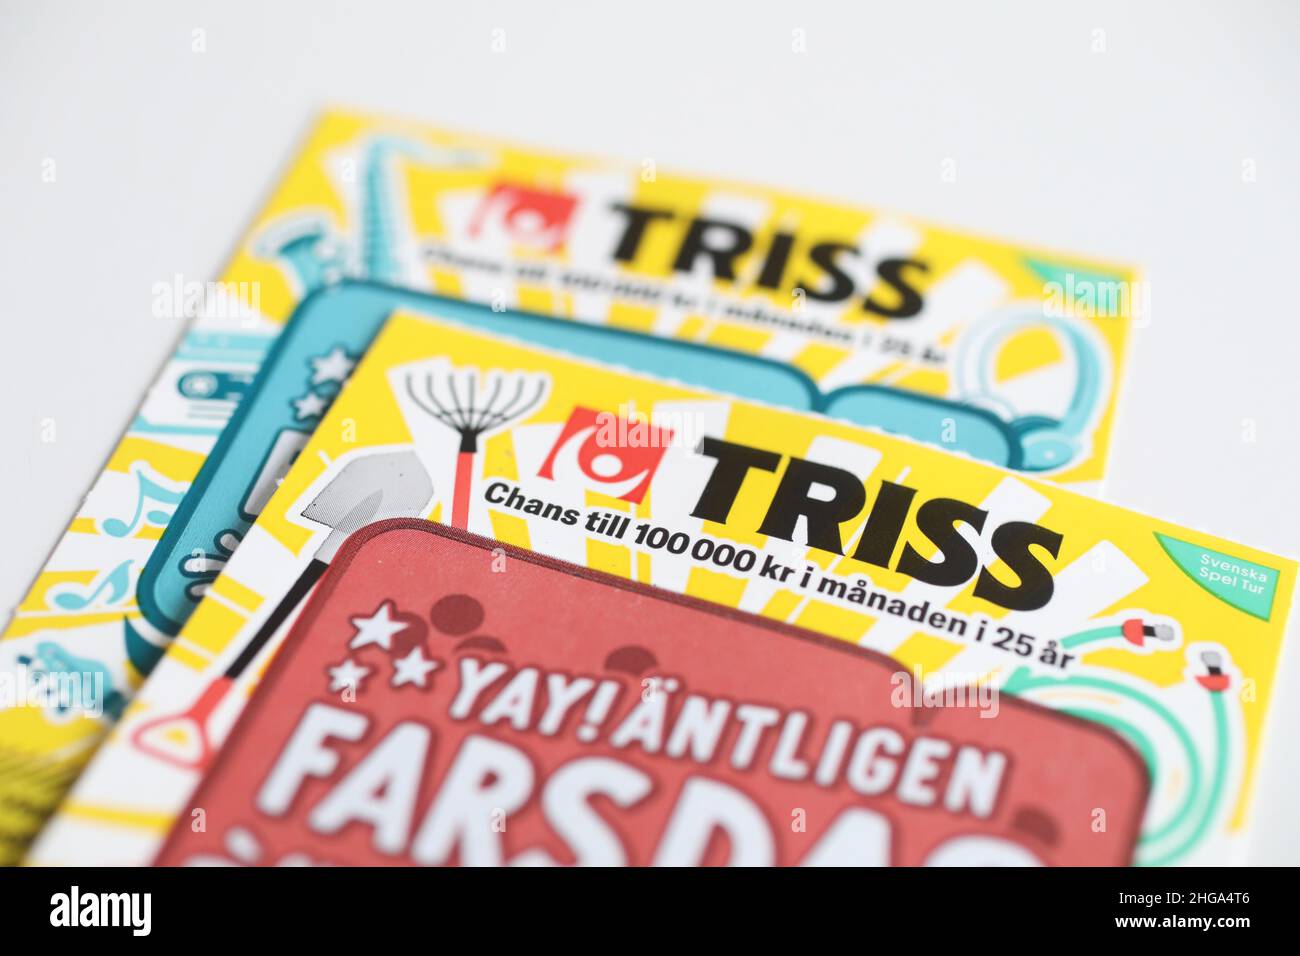 Gift for Father's Day. Father's day (In swedish: Fars dag), is celebrated on the second Sunday of November but is not a public holiday. in the picture: A lottery scratch game ticket (triss) from Svenska Spel company. Stock Photo